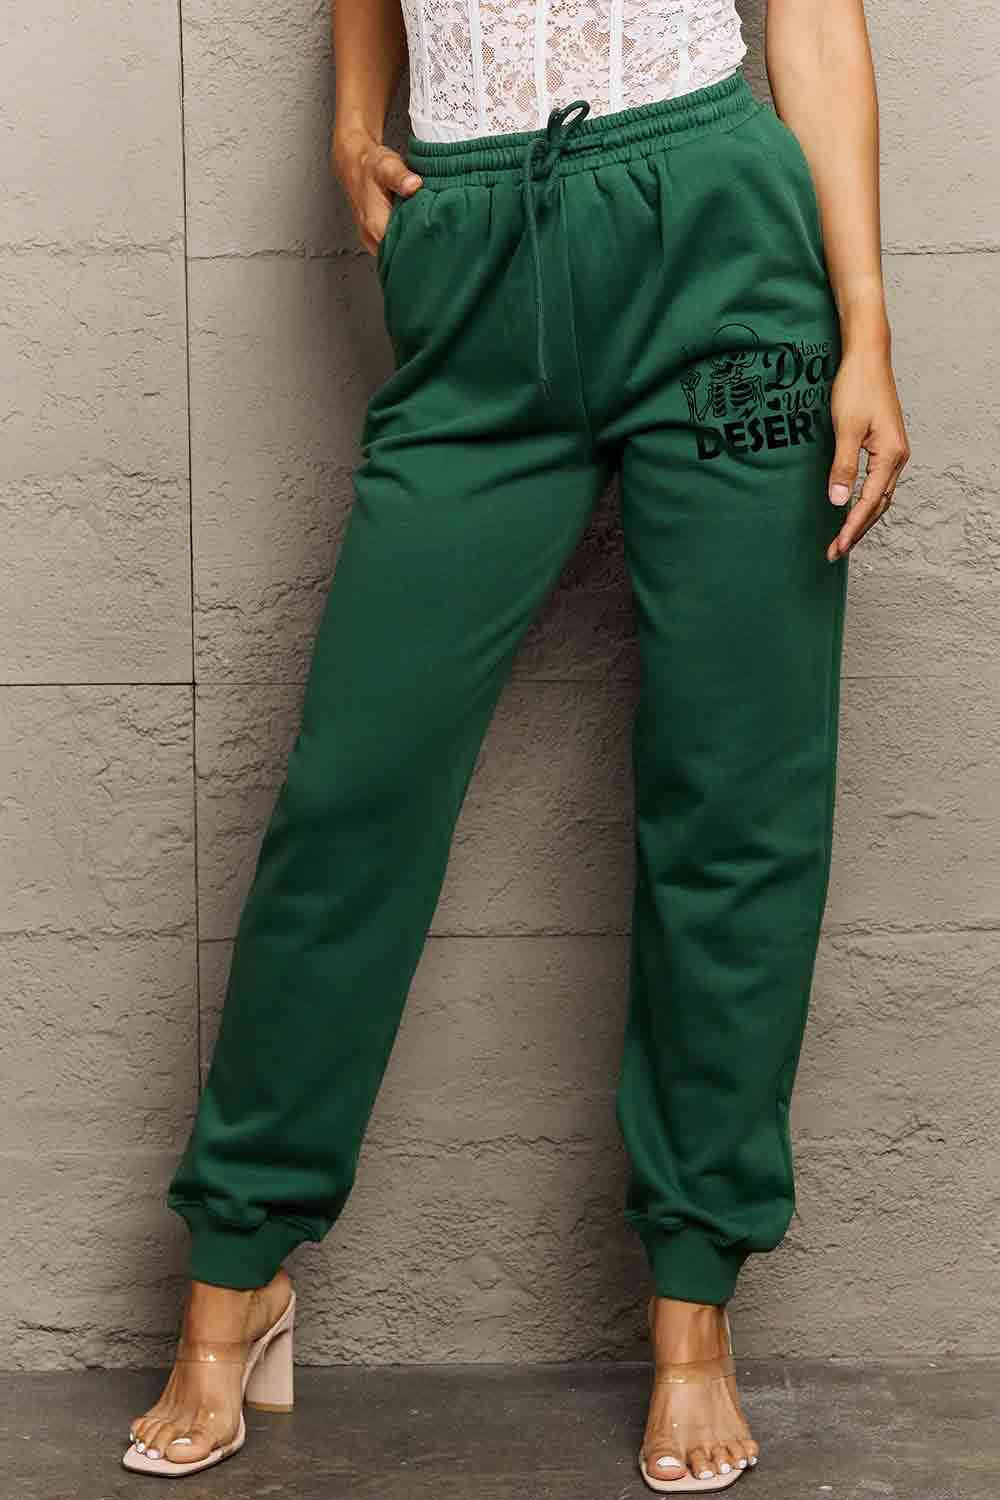 Simply Love Full Size HAVE THE DAY YOU DESERVE Graphic Sweatpants, MyriadMart